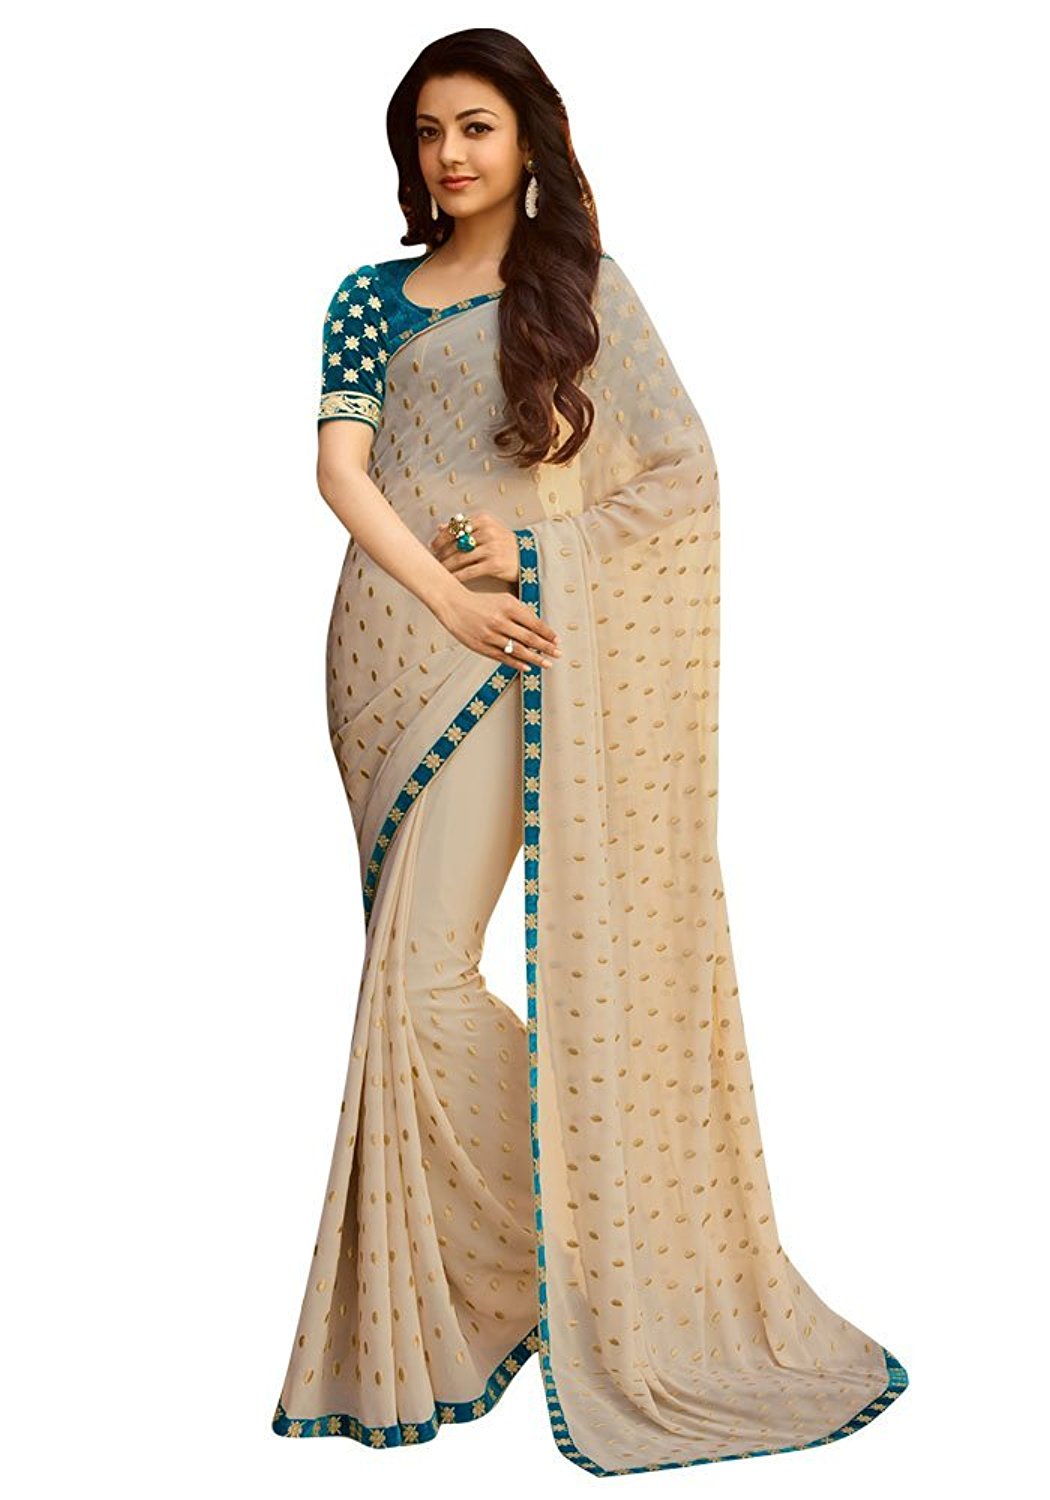 Buy Indian Style Sarees New Arrivals Latest Womens Bollywood Designer Multicolor Georgette